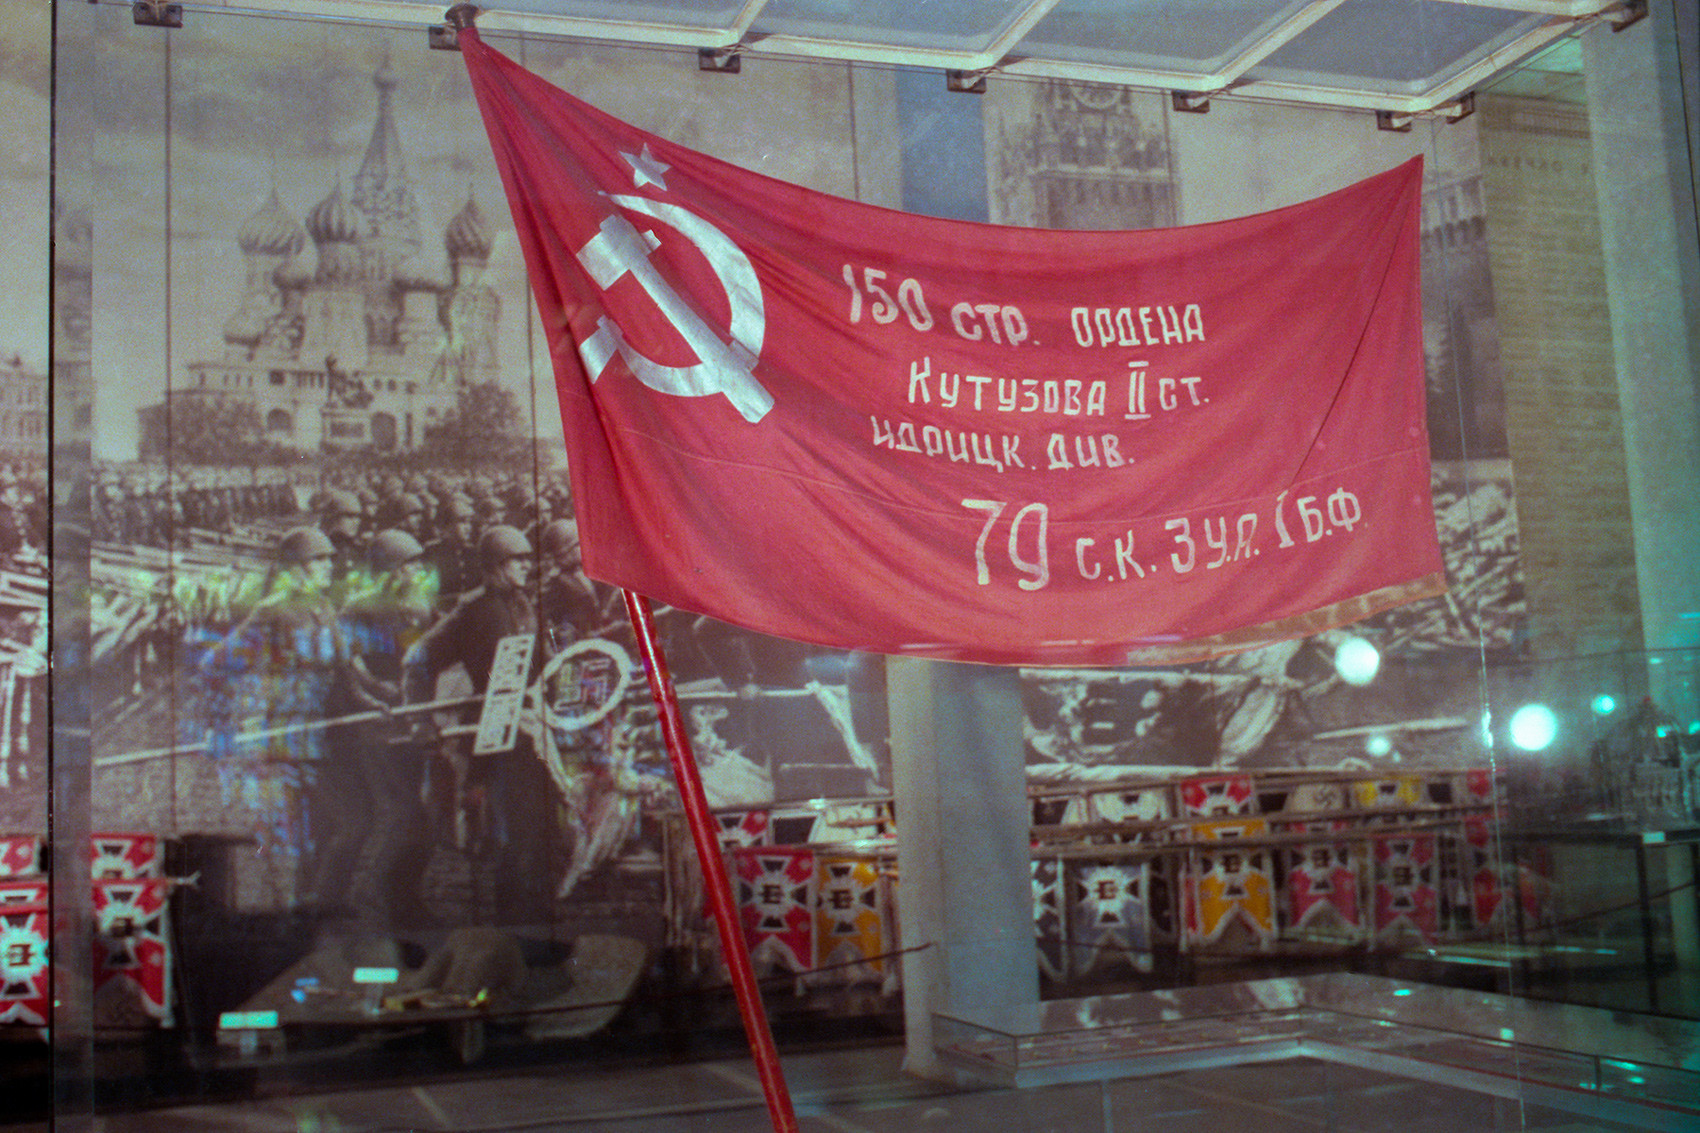 The Victory Banner (copy) in the museum